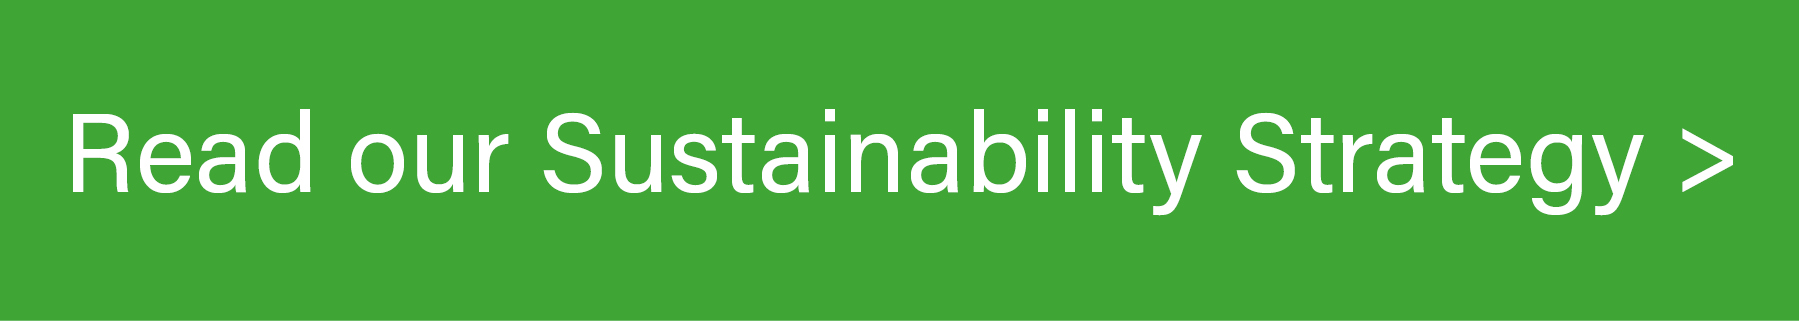 Sustainability Strategy Link